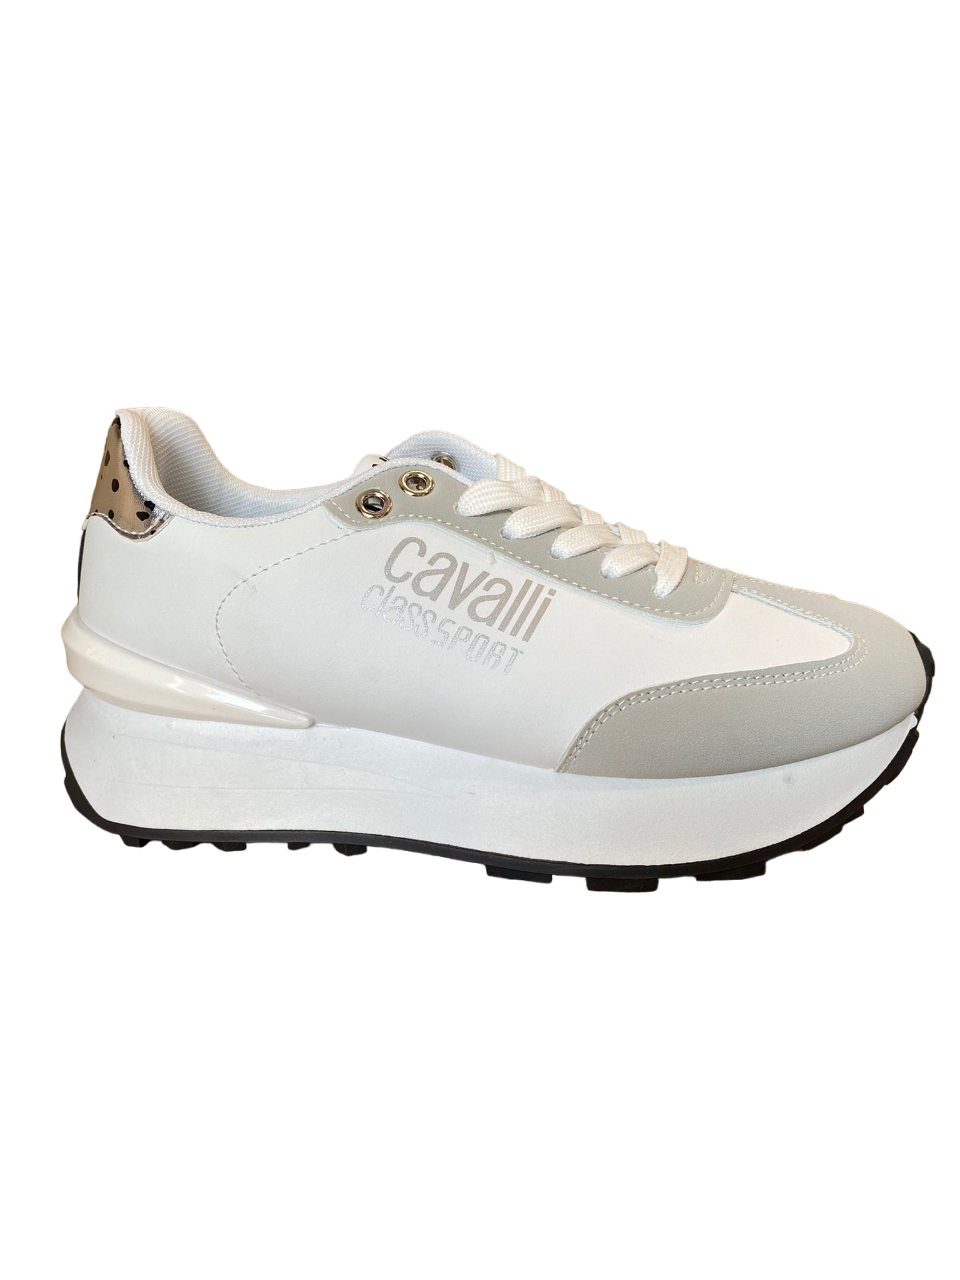 Cavalli Class Sport women&#39;s casual sneakers with wedge S00CW8638 100 white